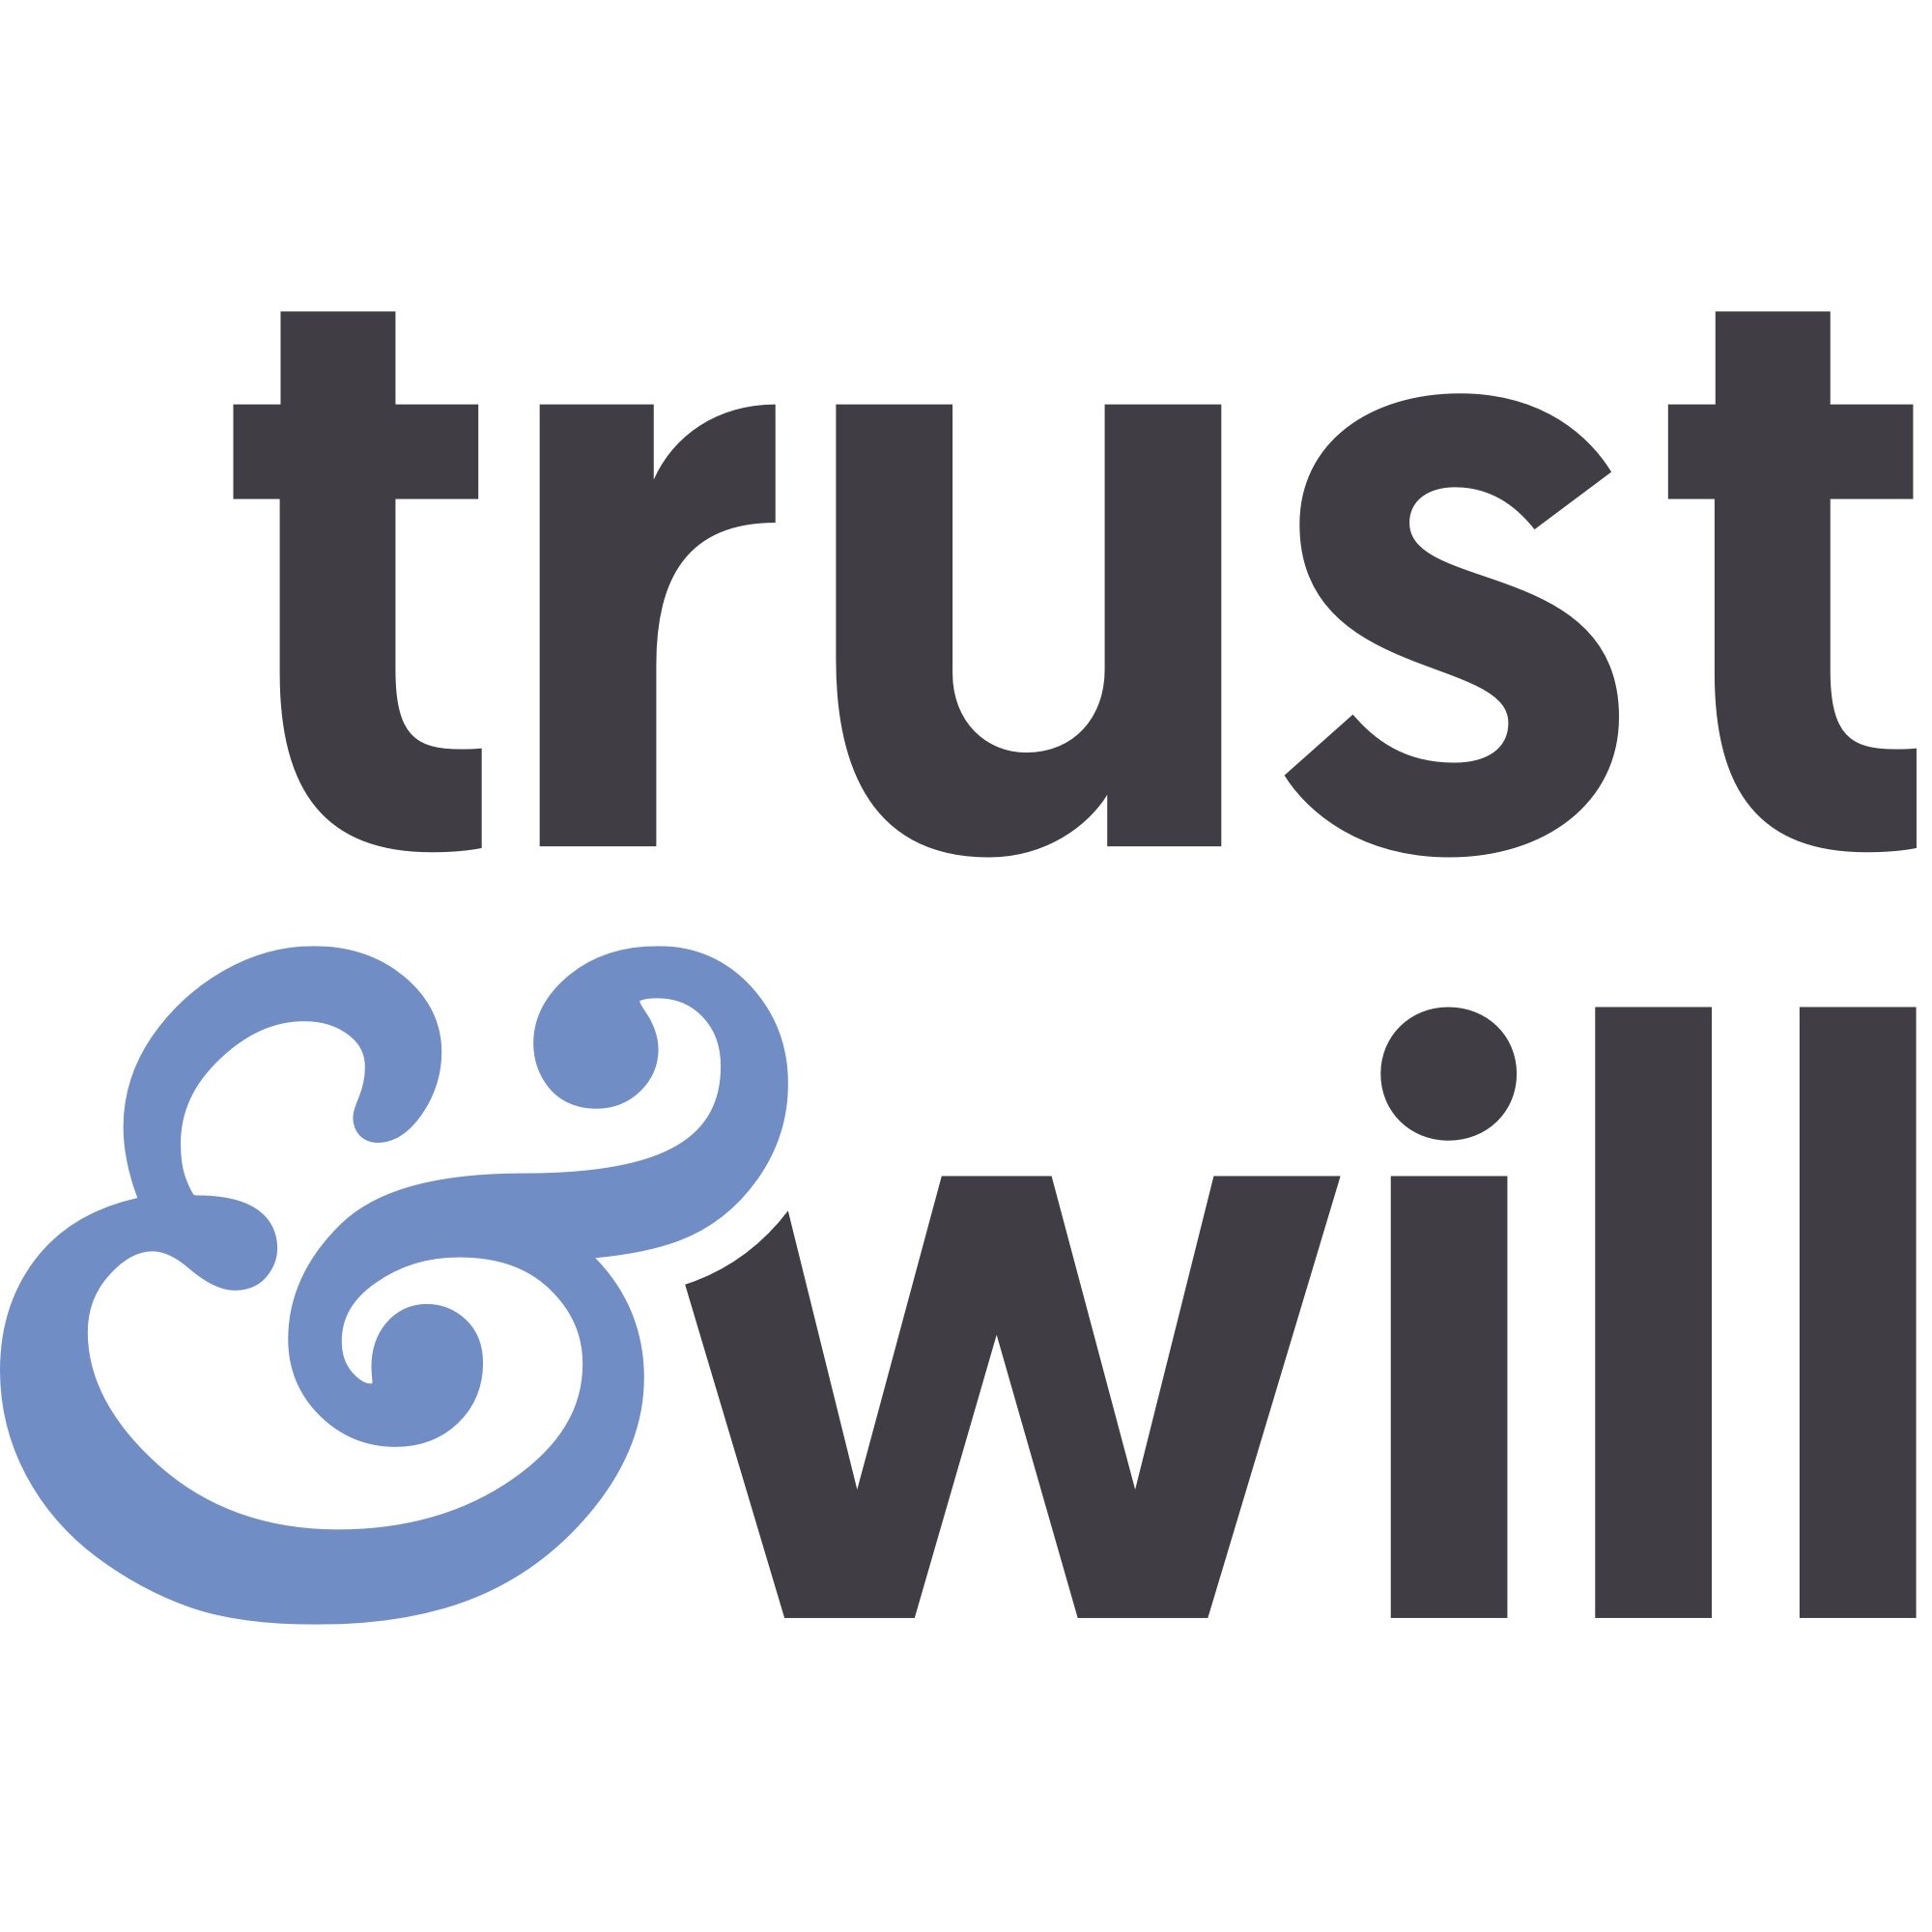 Estate Planning - Create an Online Will and Trust | Trust & Will